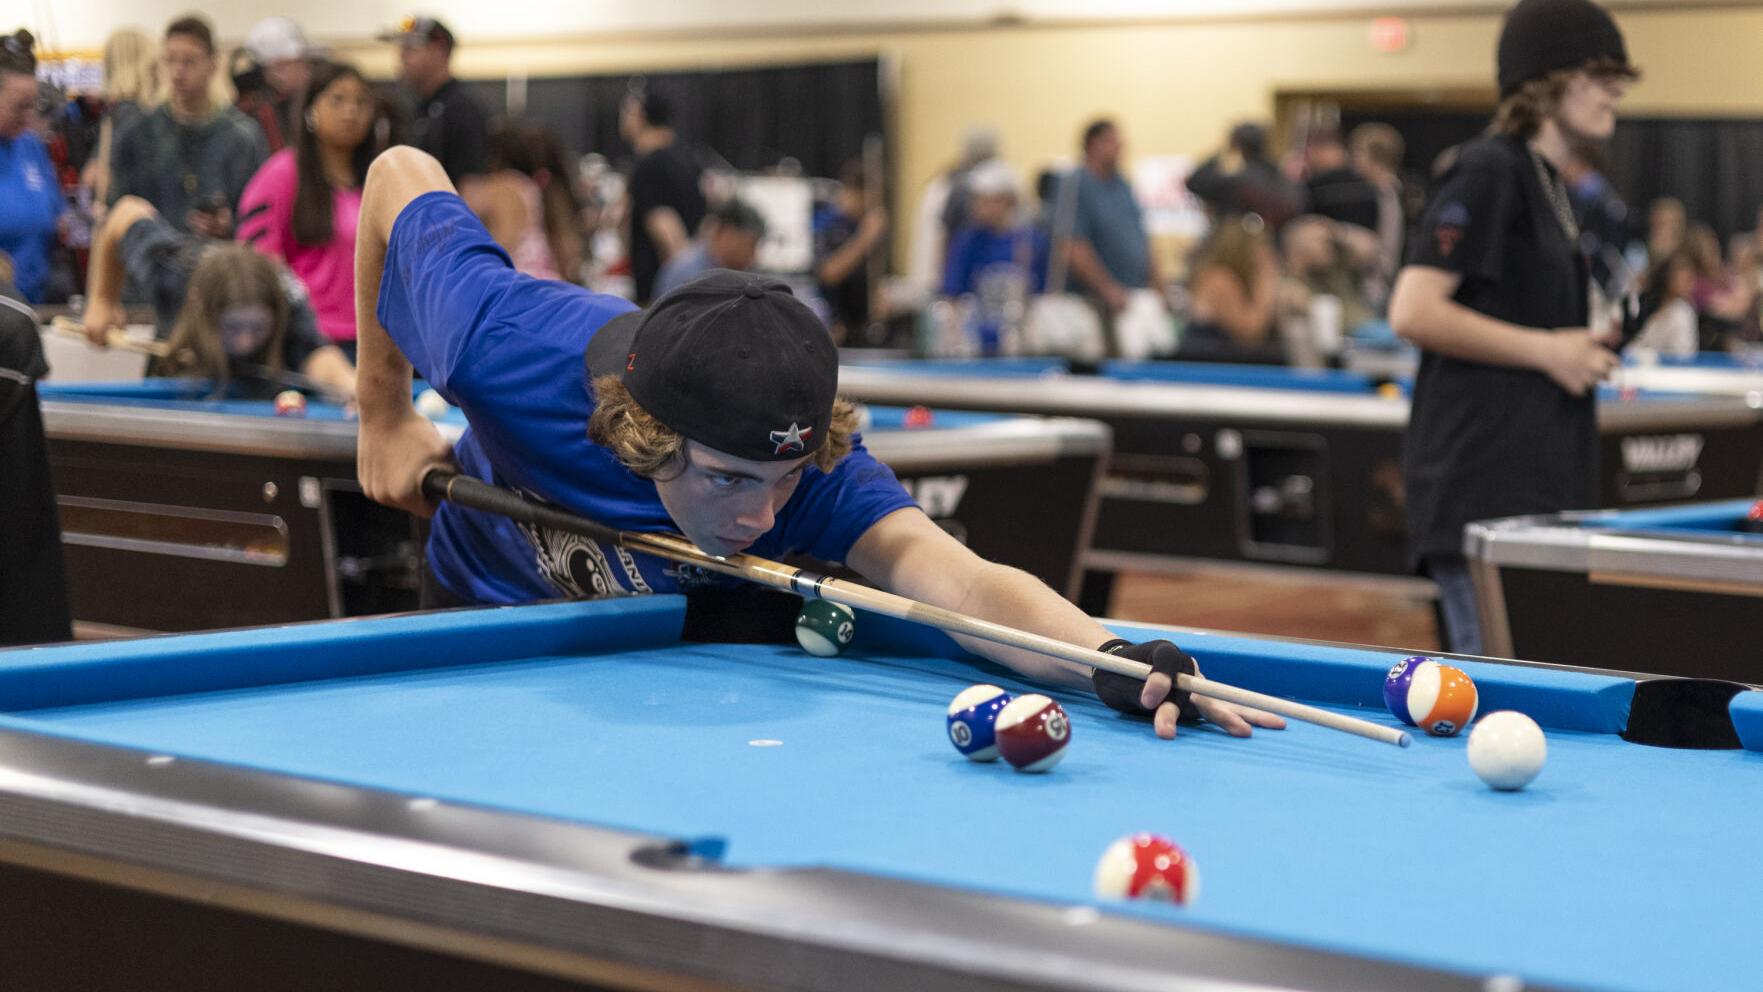 Siouxland Youth Pool League on the rise